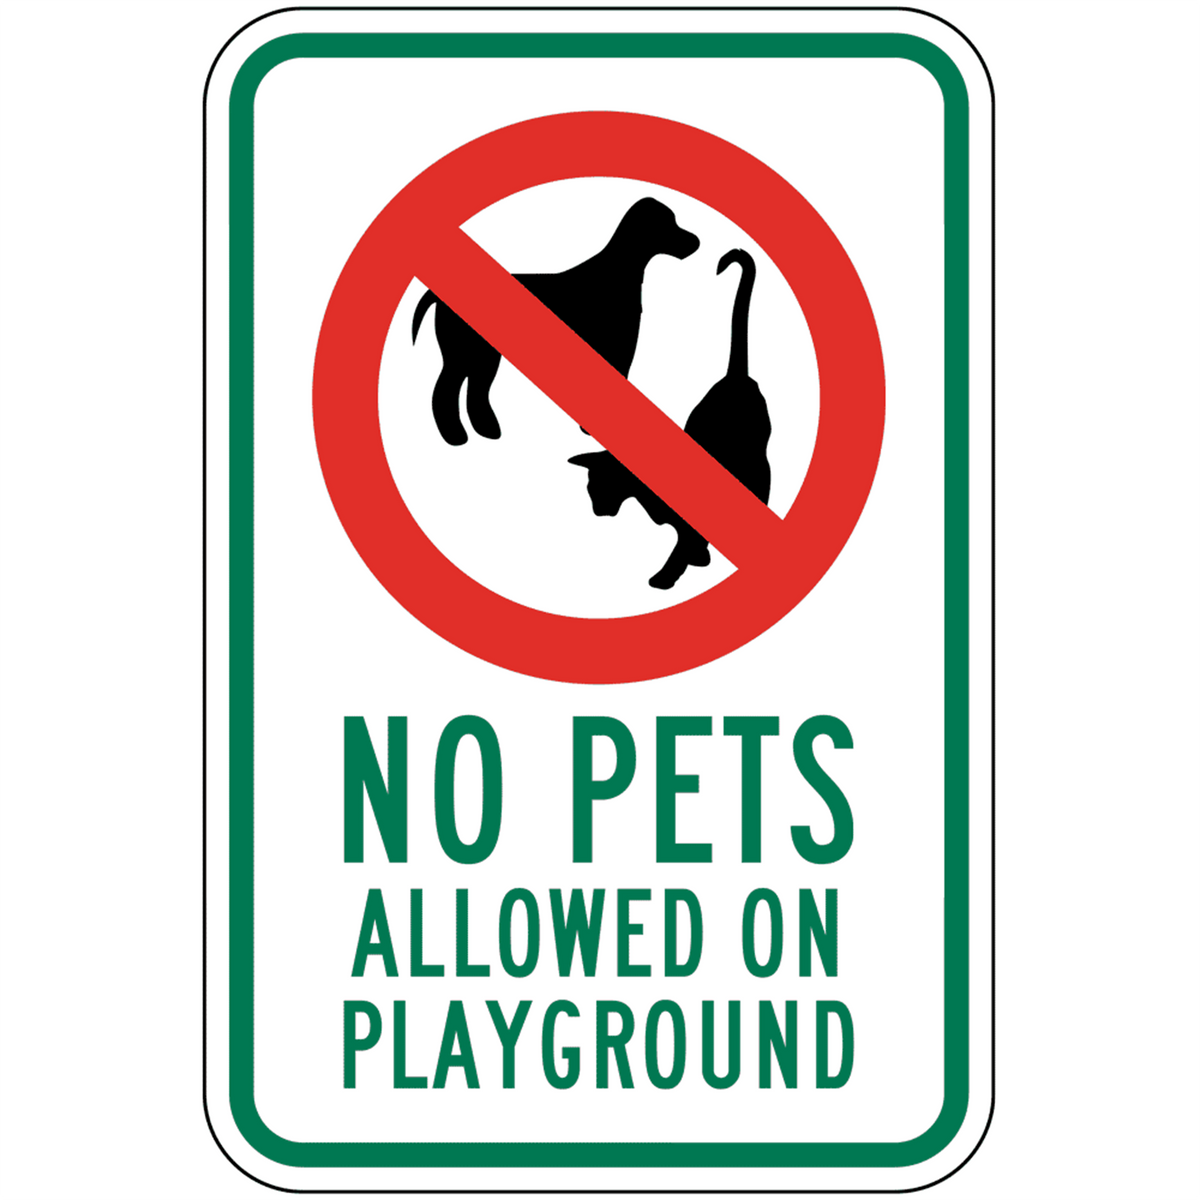 Pets allowed. Allow картинка. Pets allowed sign. Х not allowed.